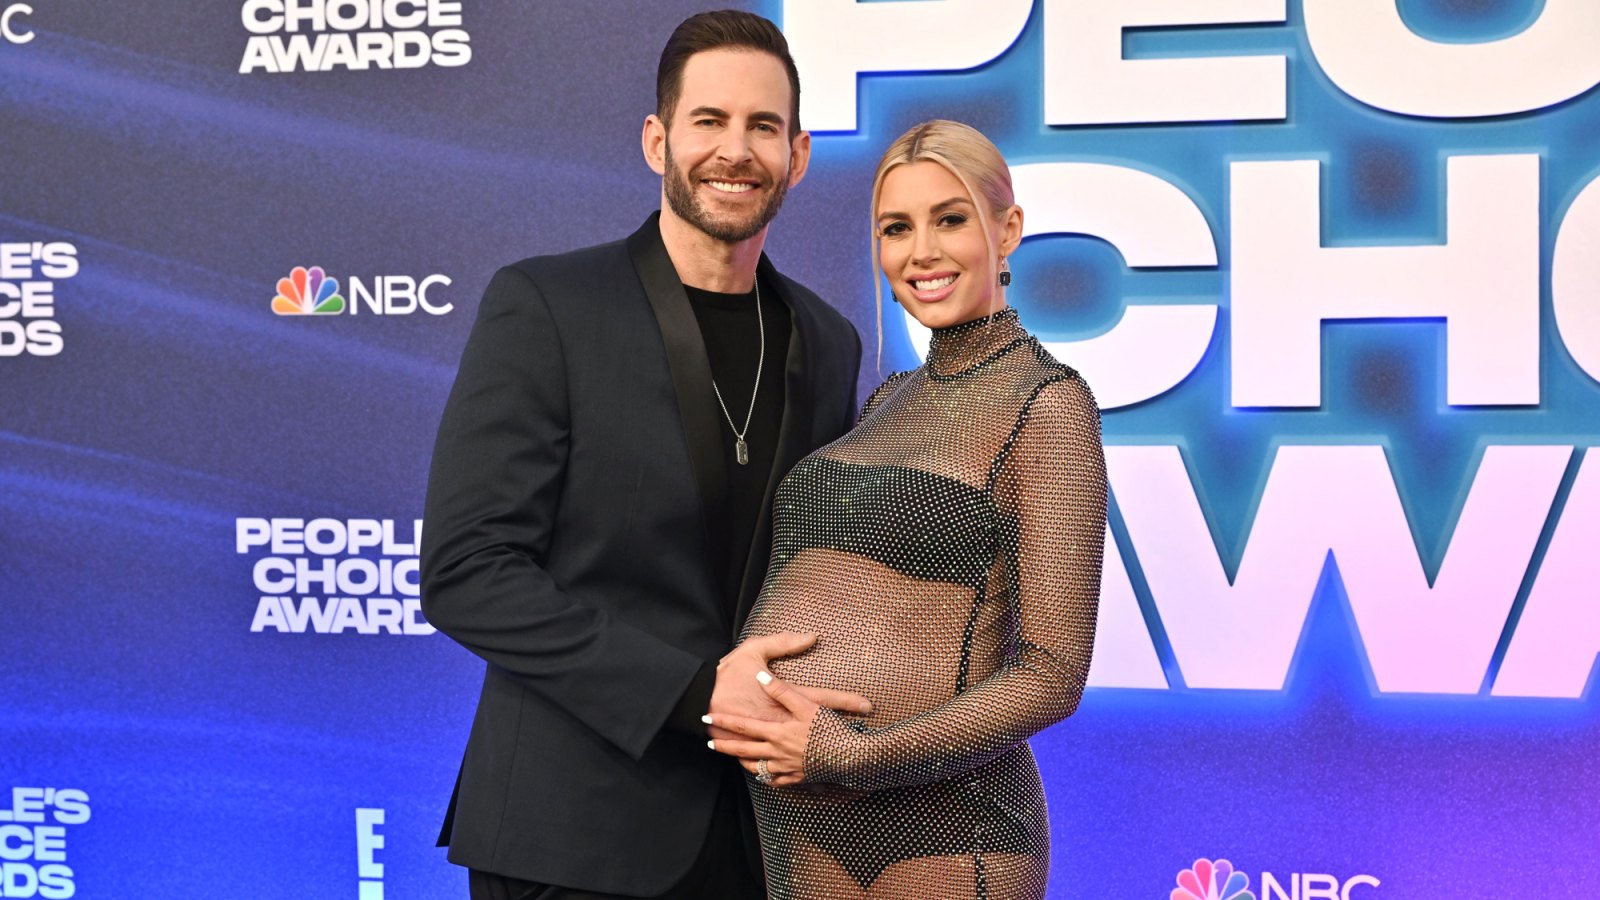 Tarek El Moussa and Pregnant Heather Rae Young Offer a Glimpse at Their 'Different' New Year's Eve Celebration